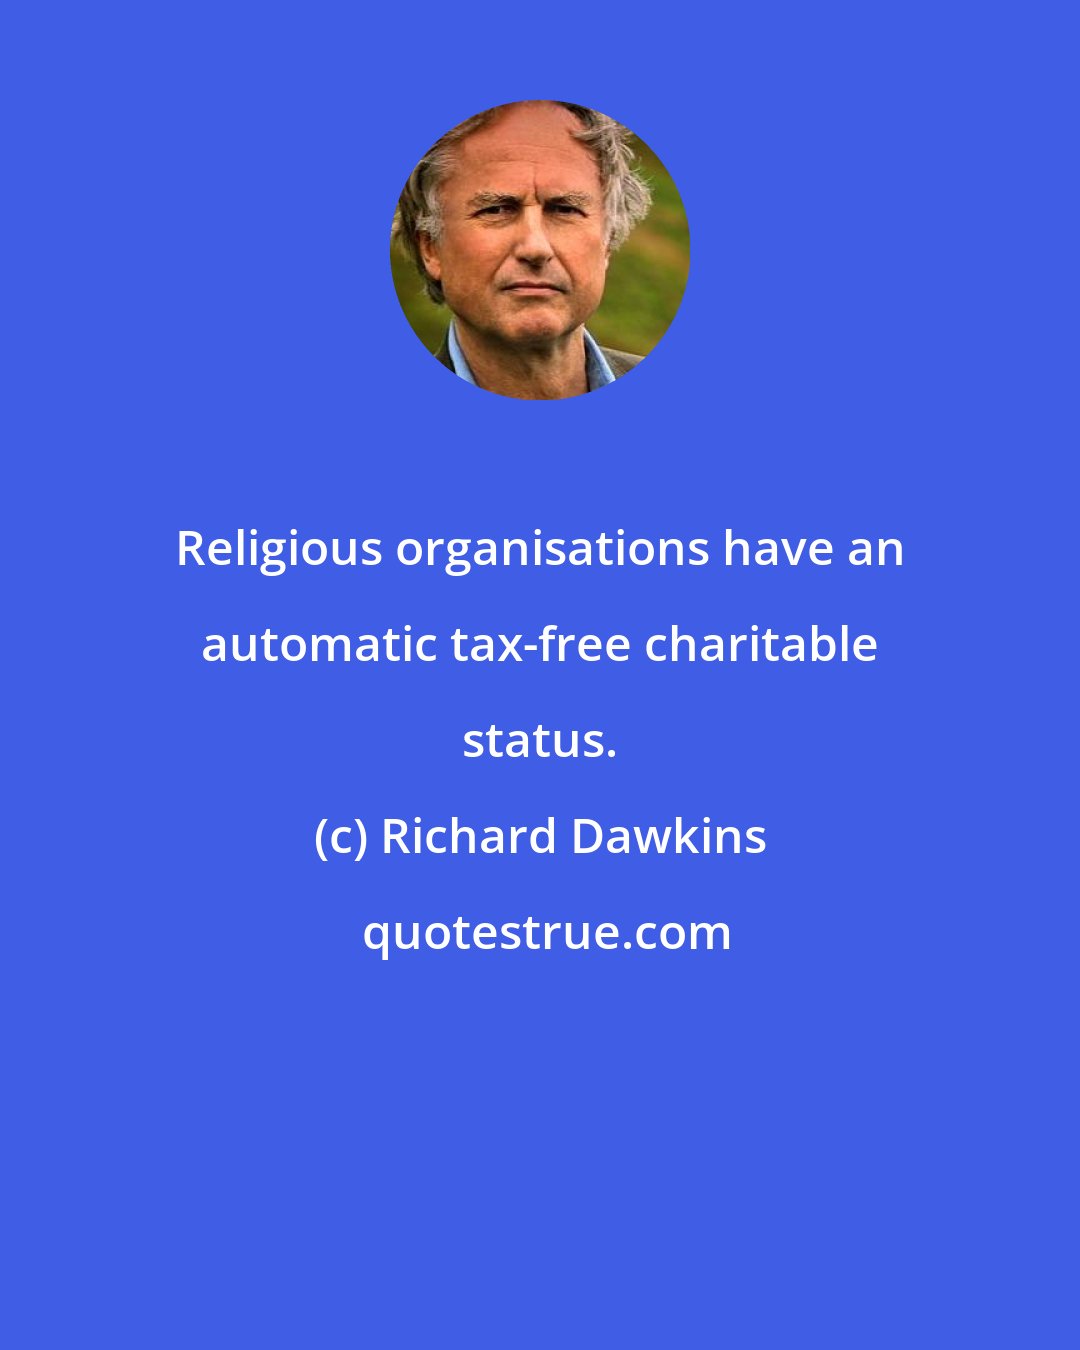 Richard Dawkins: Religious organisations have an automatic tax-free charitable status.